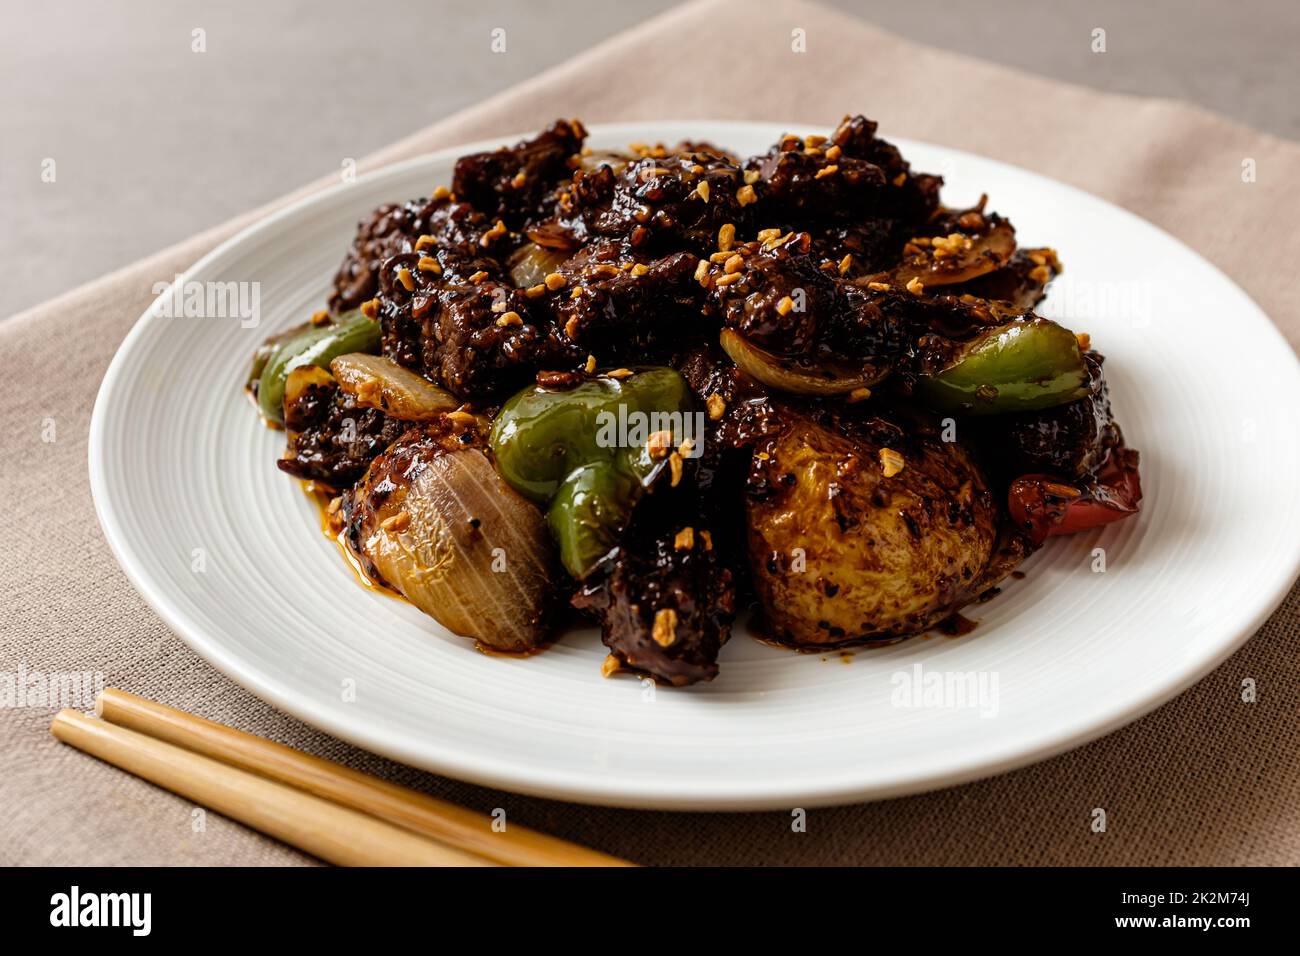 chinese food culture. spicy and spicy food. dishes full of spices Stock Photo